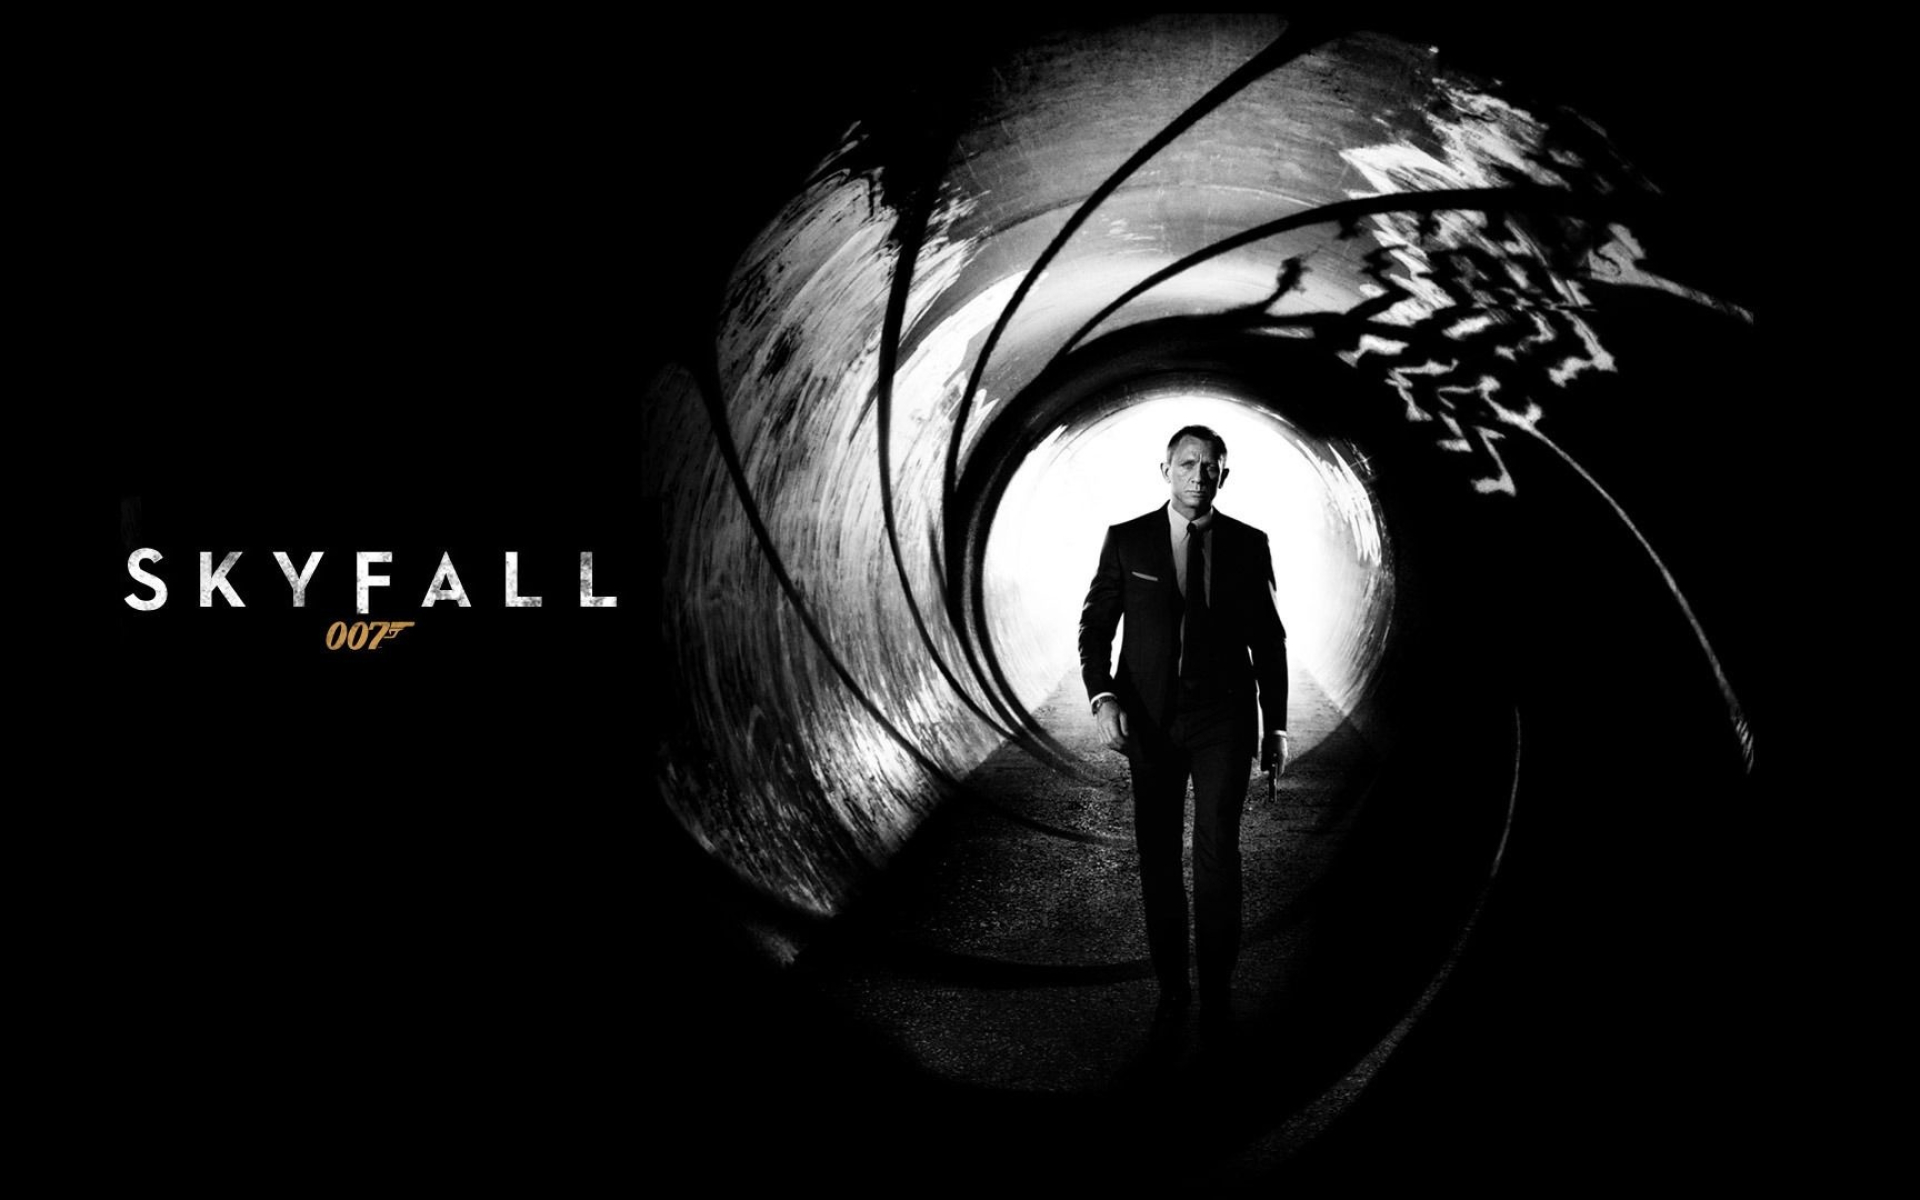 Skyfall: The highest-grossing James Bond film, 007, Black and white. 1920x1200 HD Background.